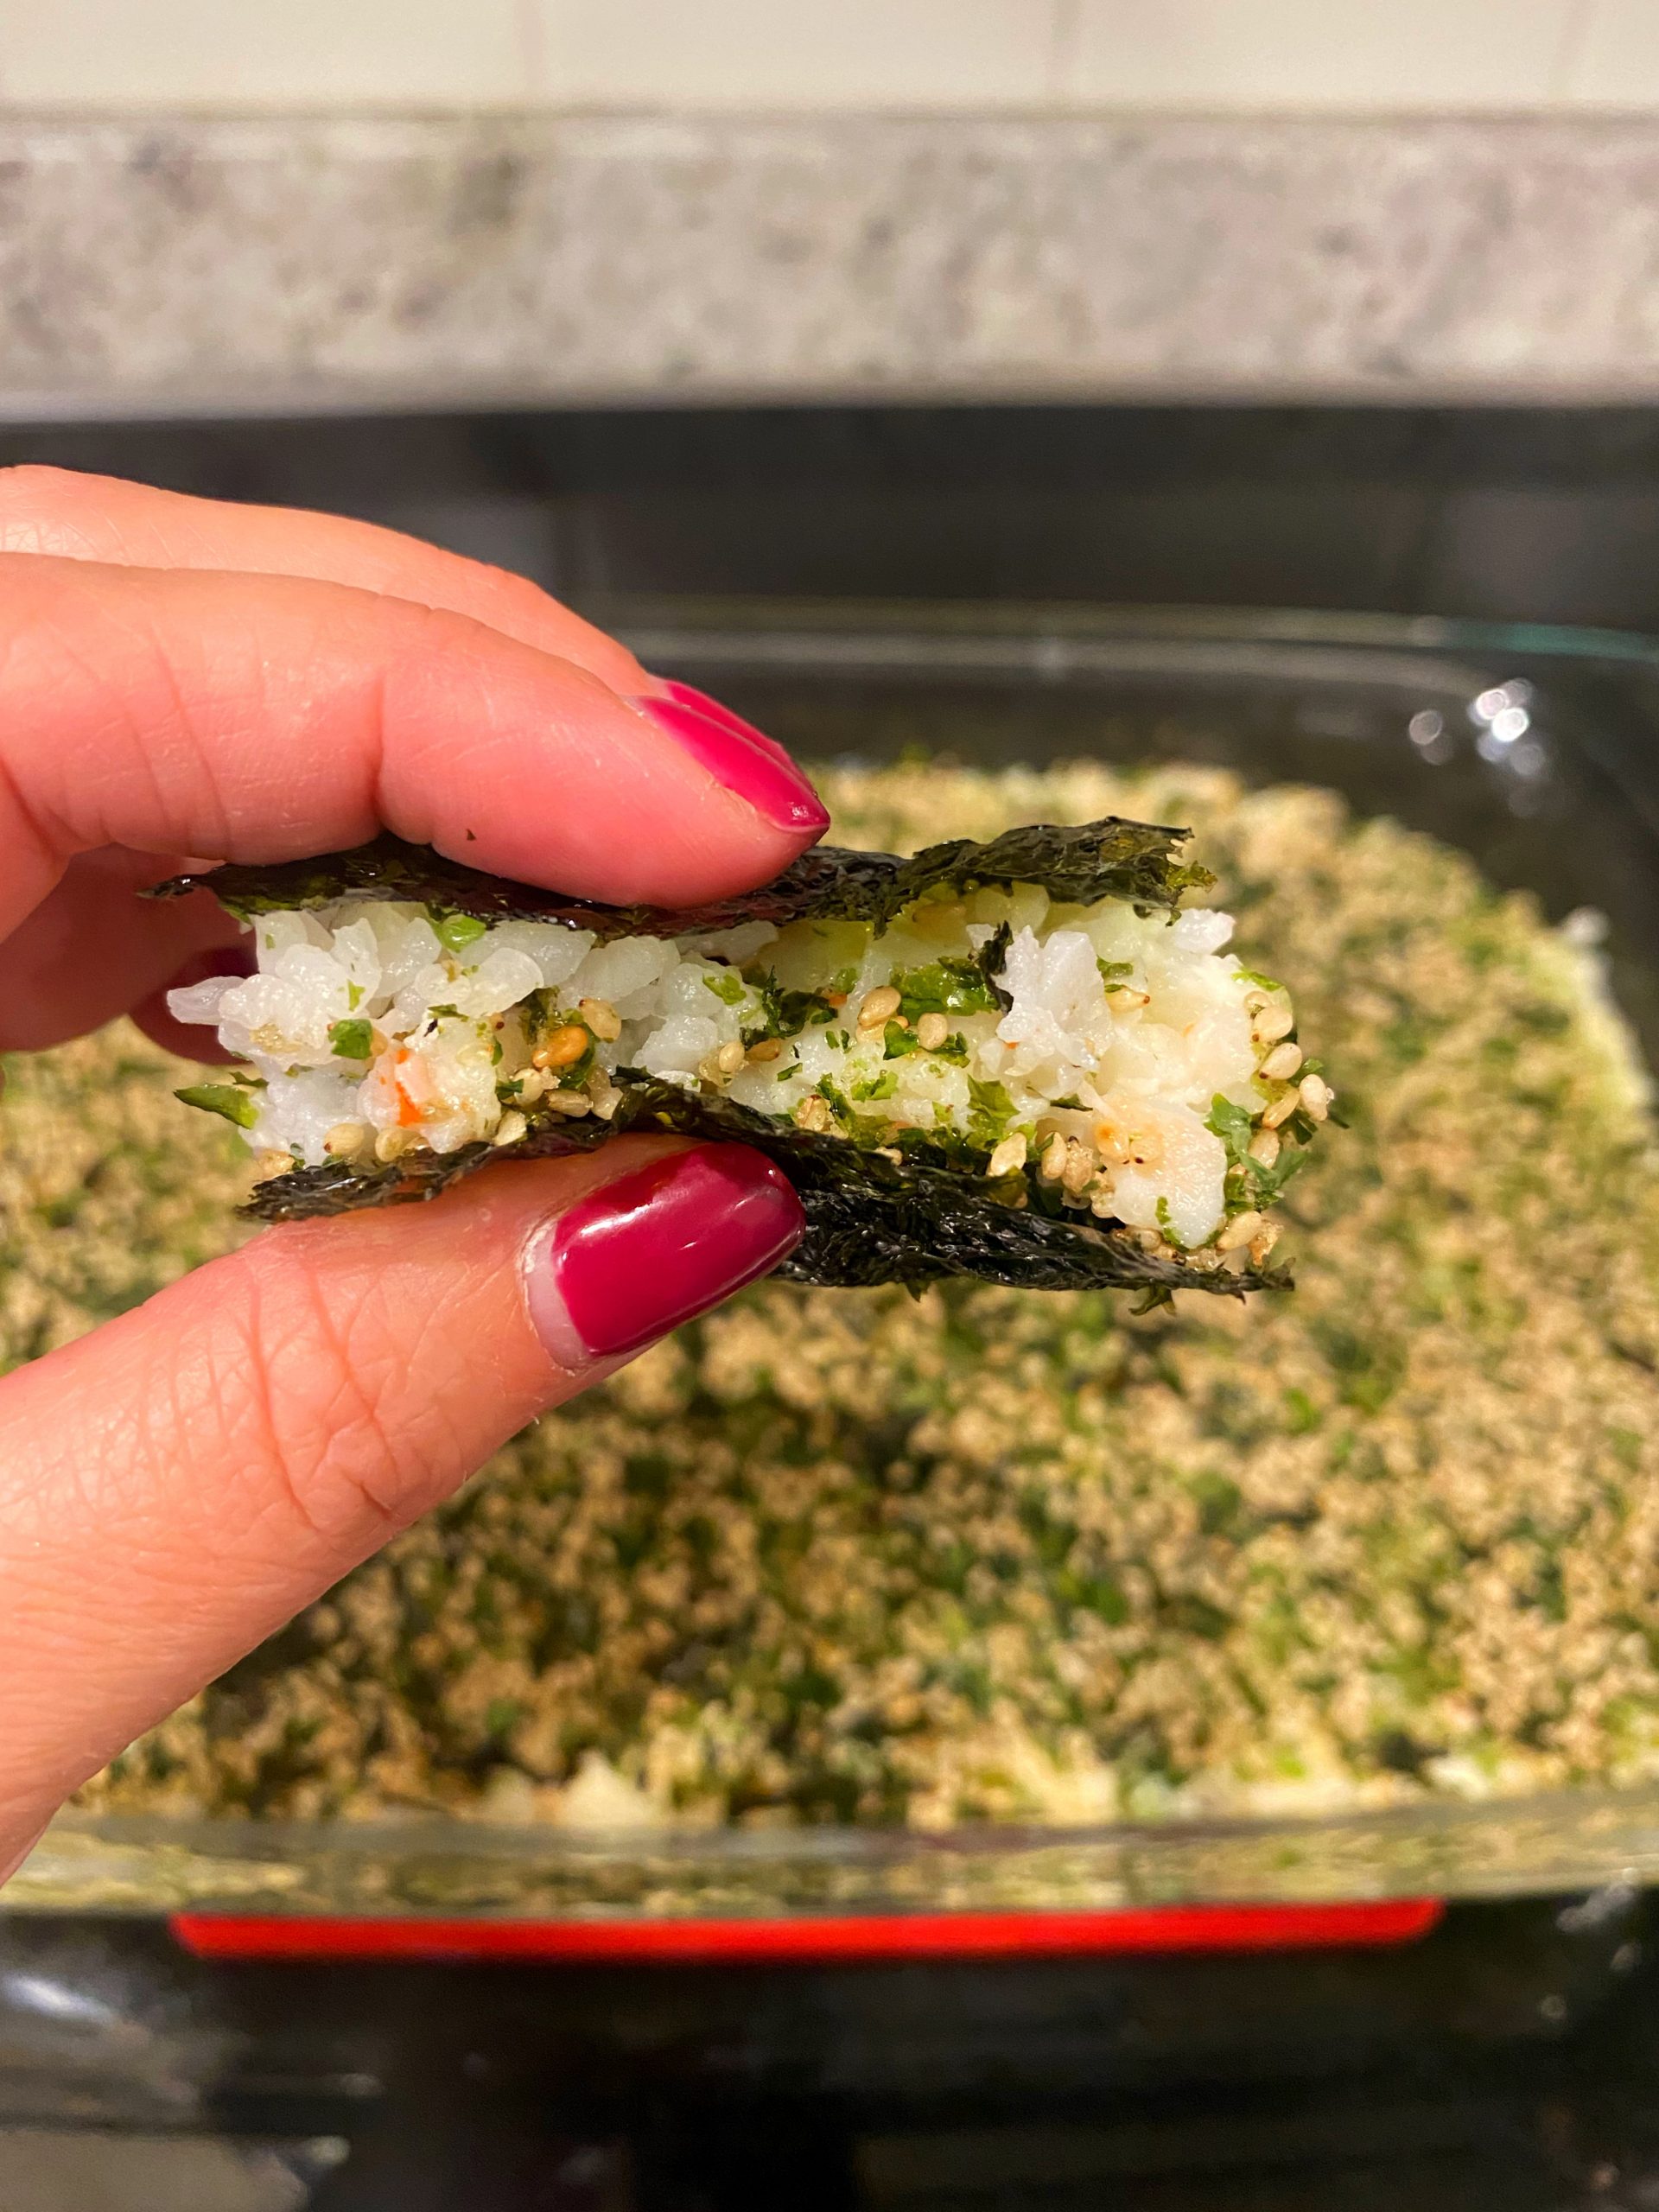 Sushi bake: it's what's for dinner. This easy recipe is not only seriously simple but crazy addicting because it's so delicious! YOU WILL LOVE